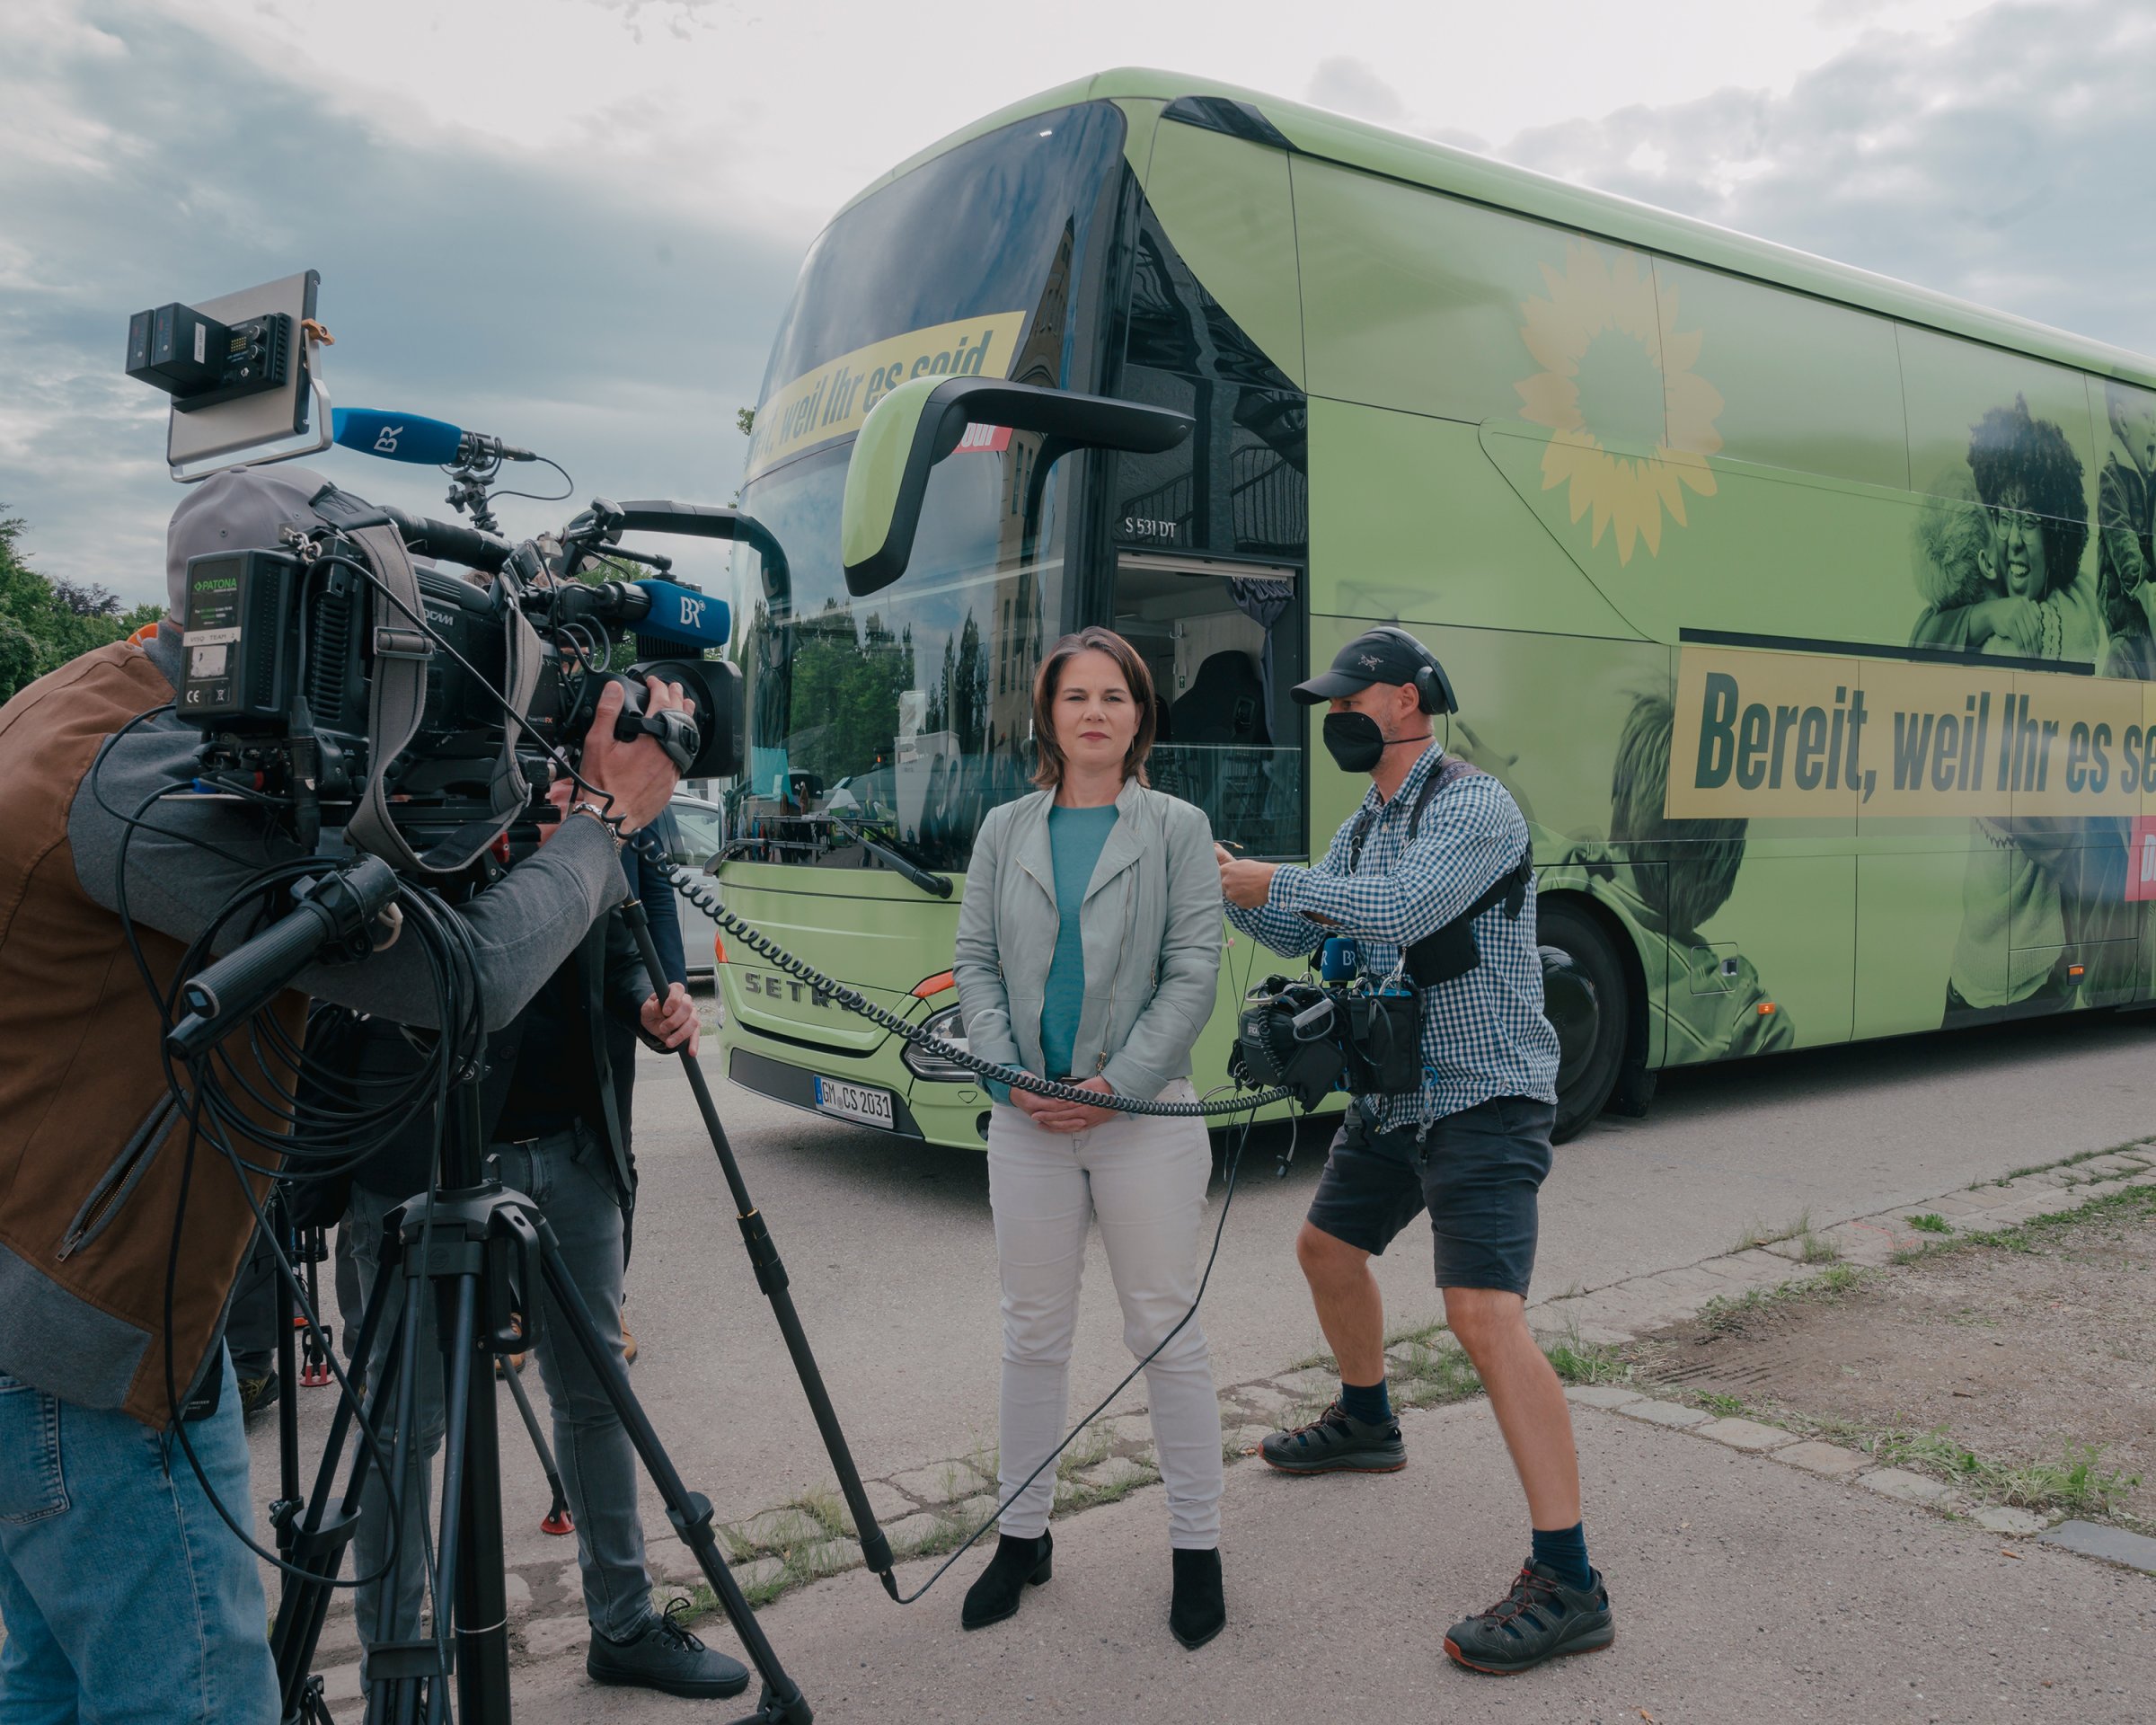 Annalena Baerbock of Alliance 90/The Greens (Bündniss 90/Die Grünen) gives interviews to German Media at a election campaign event in Dachau, Germany, on Aug. 17.